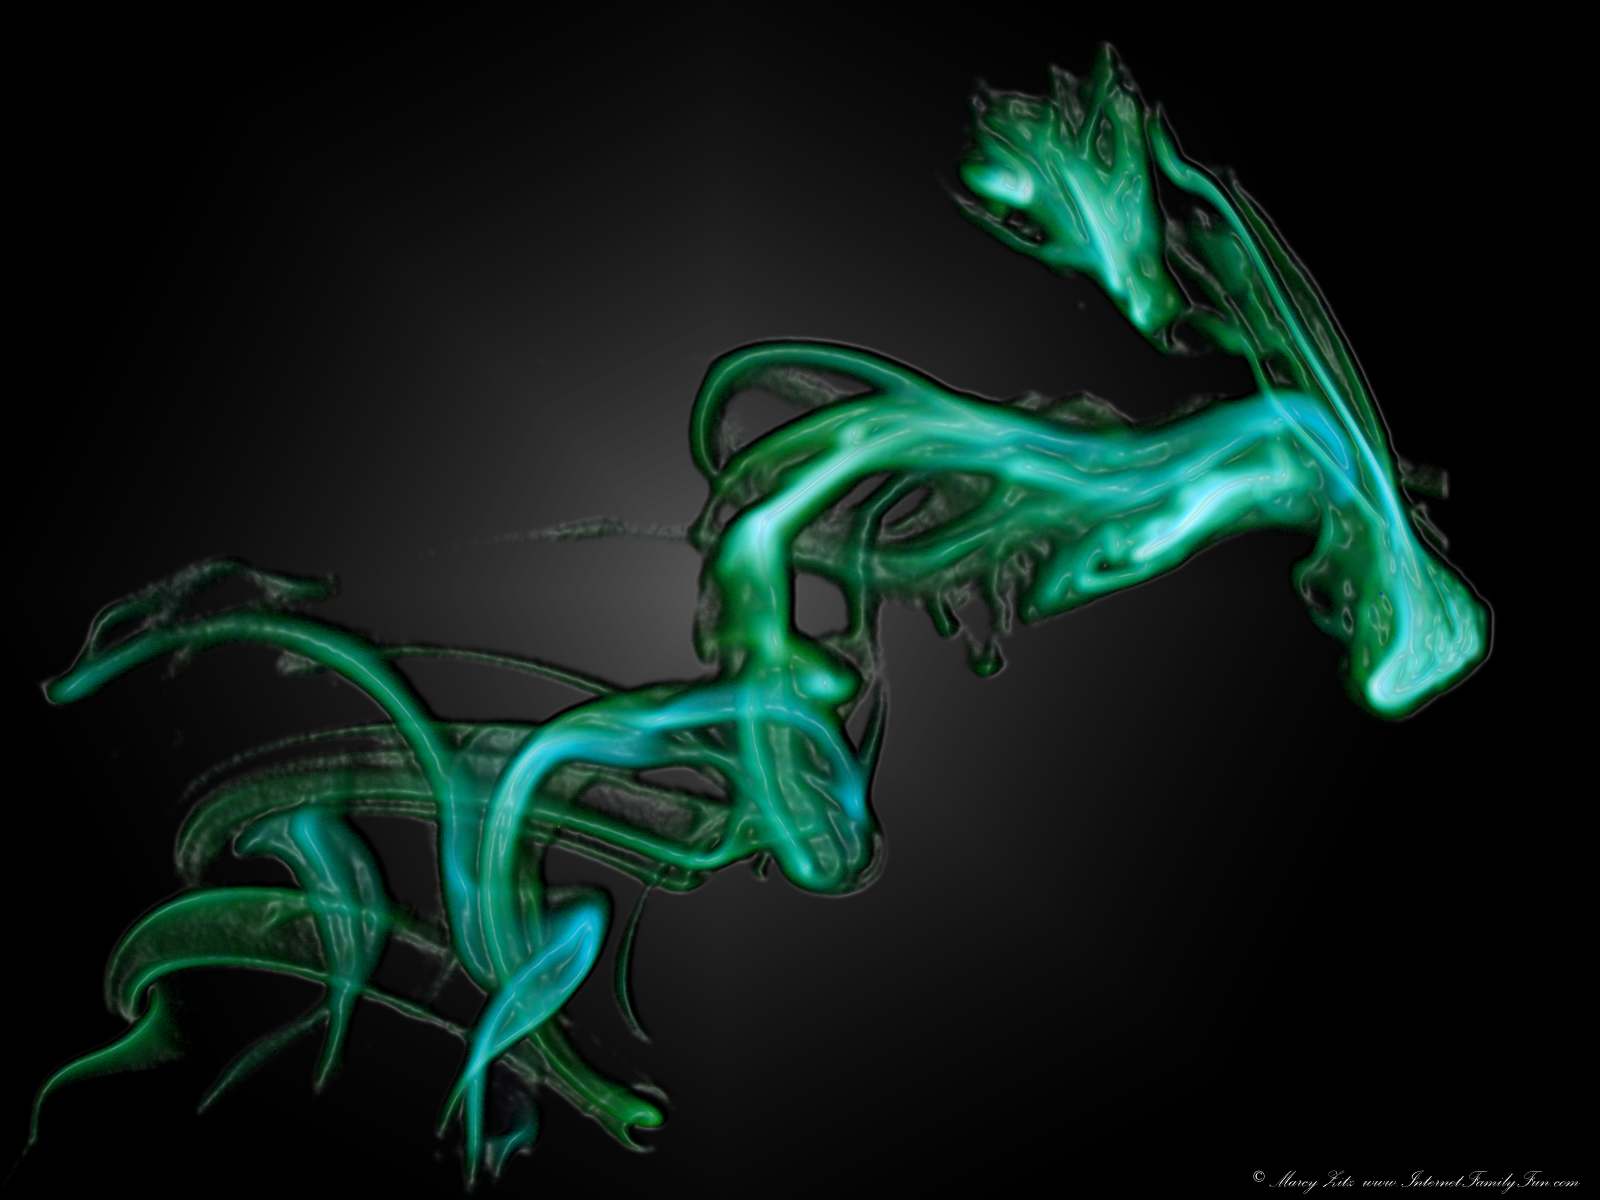 Abstract Dragon Wallpaper Background for Deskx1200PX